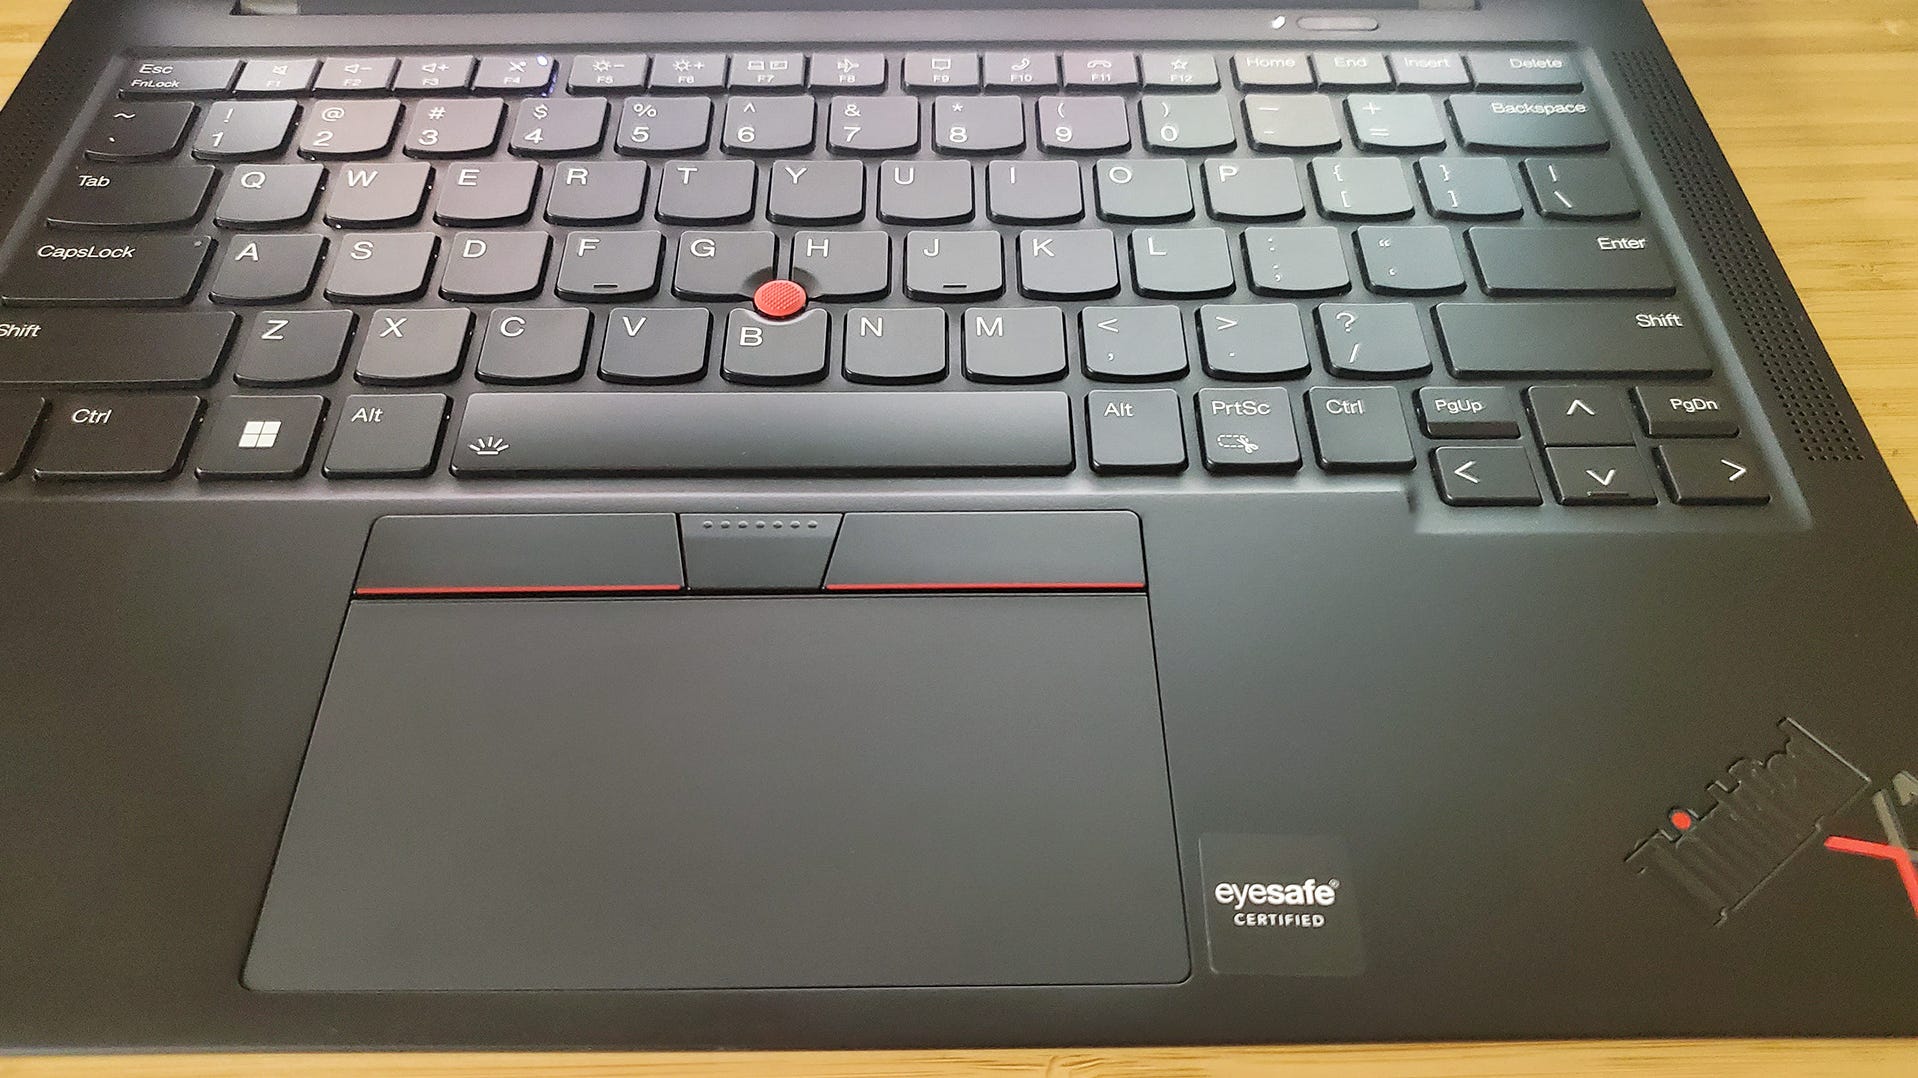 The Lenovo ThinkPad X1 Carbon laptop's trackpad and keyboard.